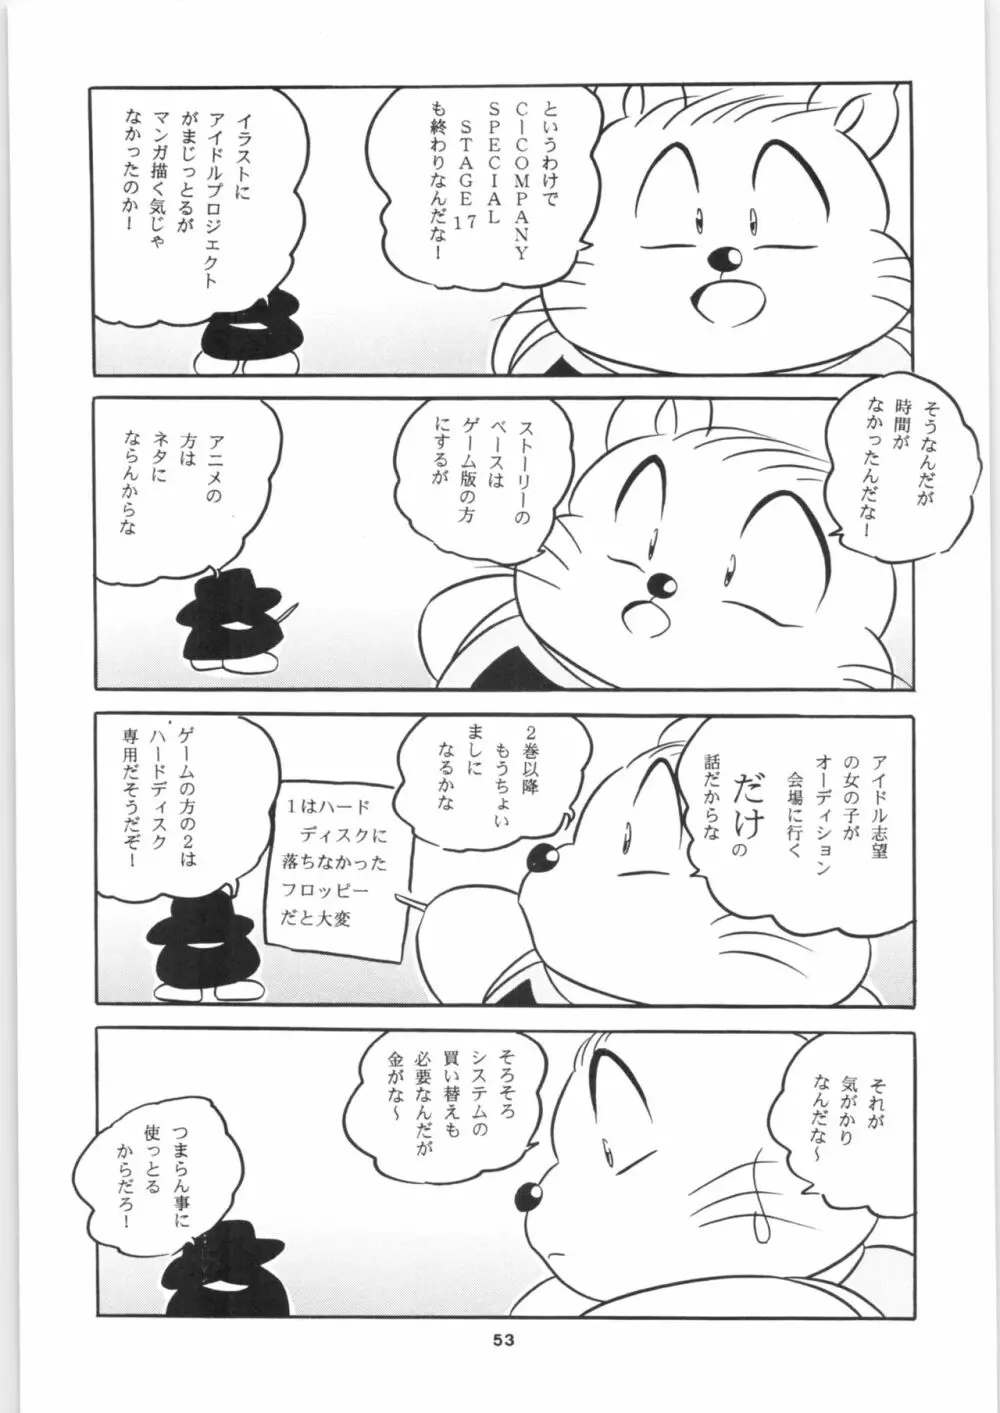 C-COMPANY SPECIAL STAGE 17 Page.55